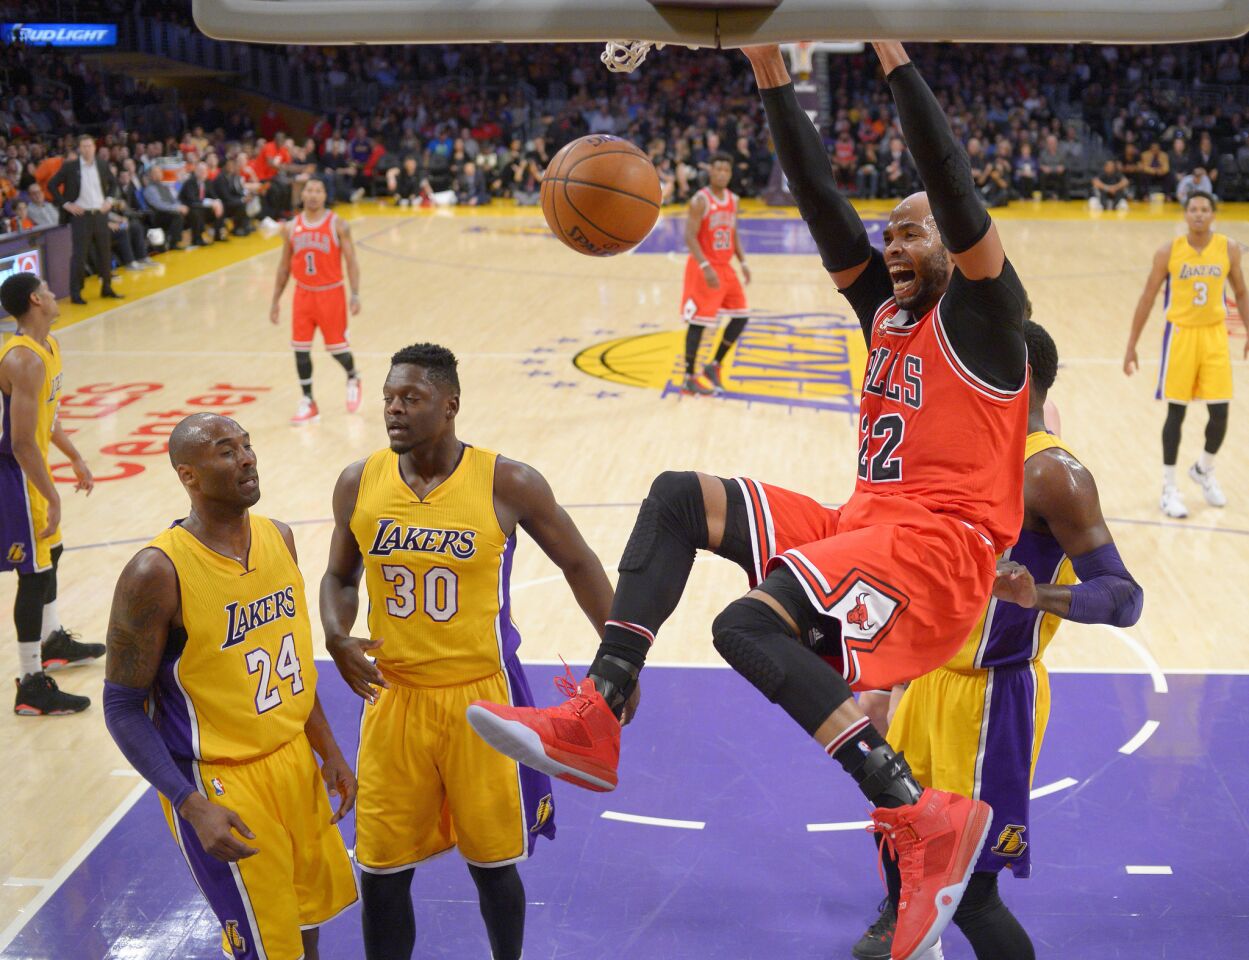 Bulls forward Taj Gibson, front right, dunks as the Lakers' Kobe Bryant (24) and forward Julius Randle (30) watch during the first half.